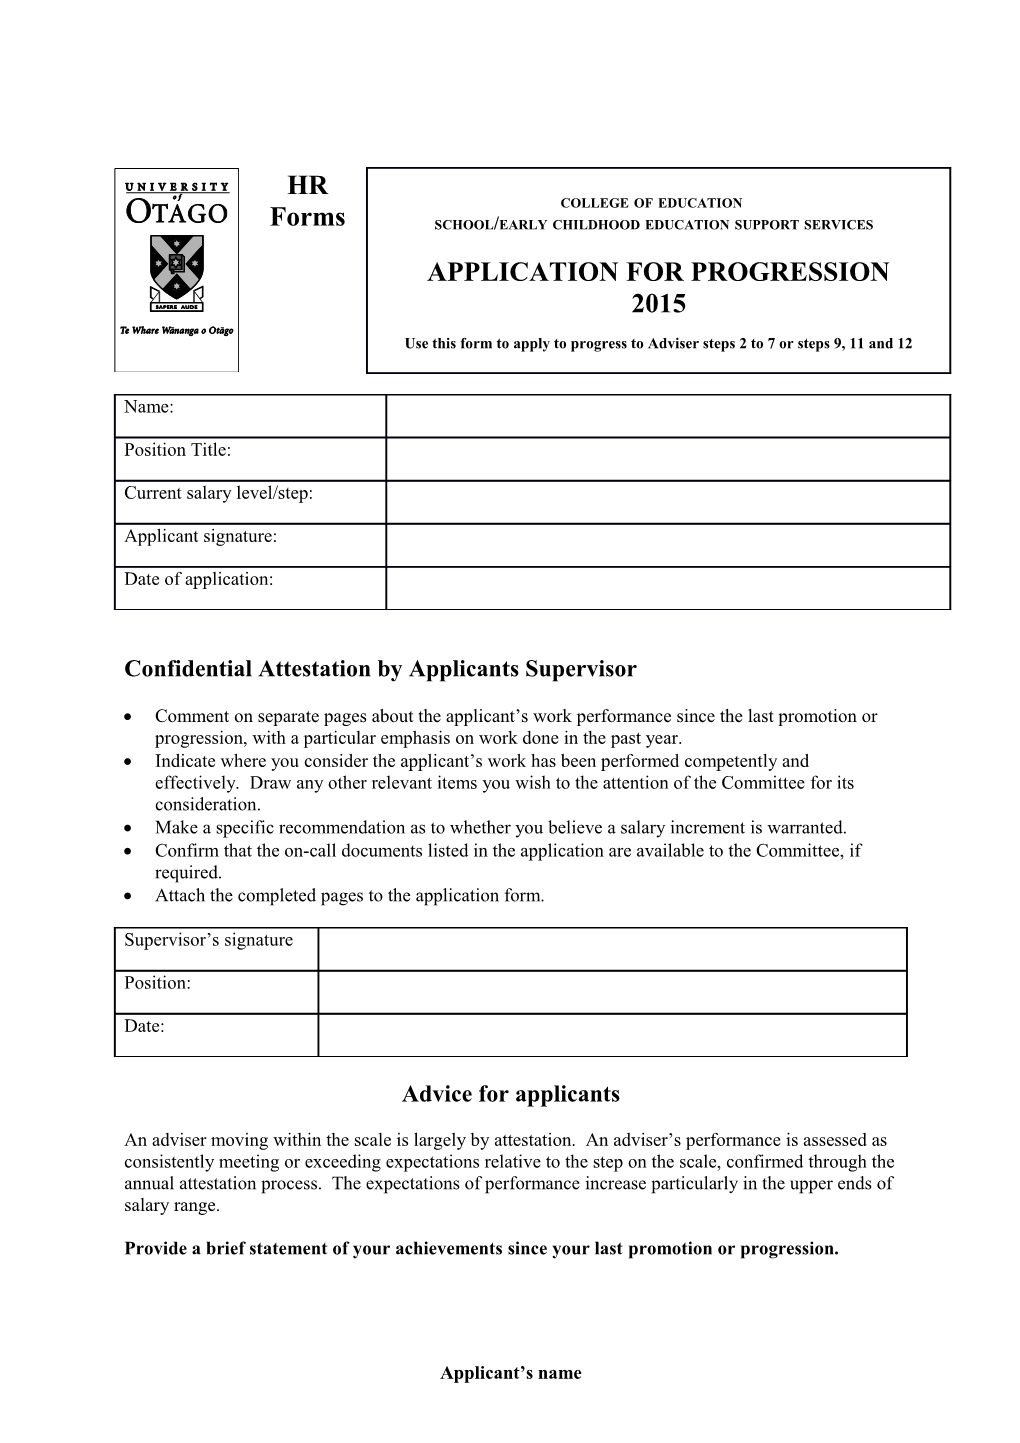 Confidential Attestation by Applicants Supervisor